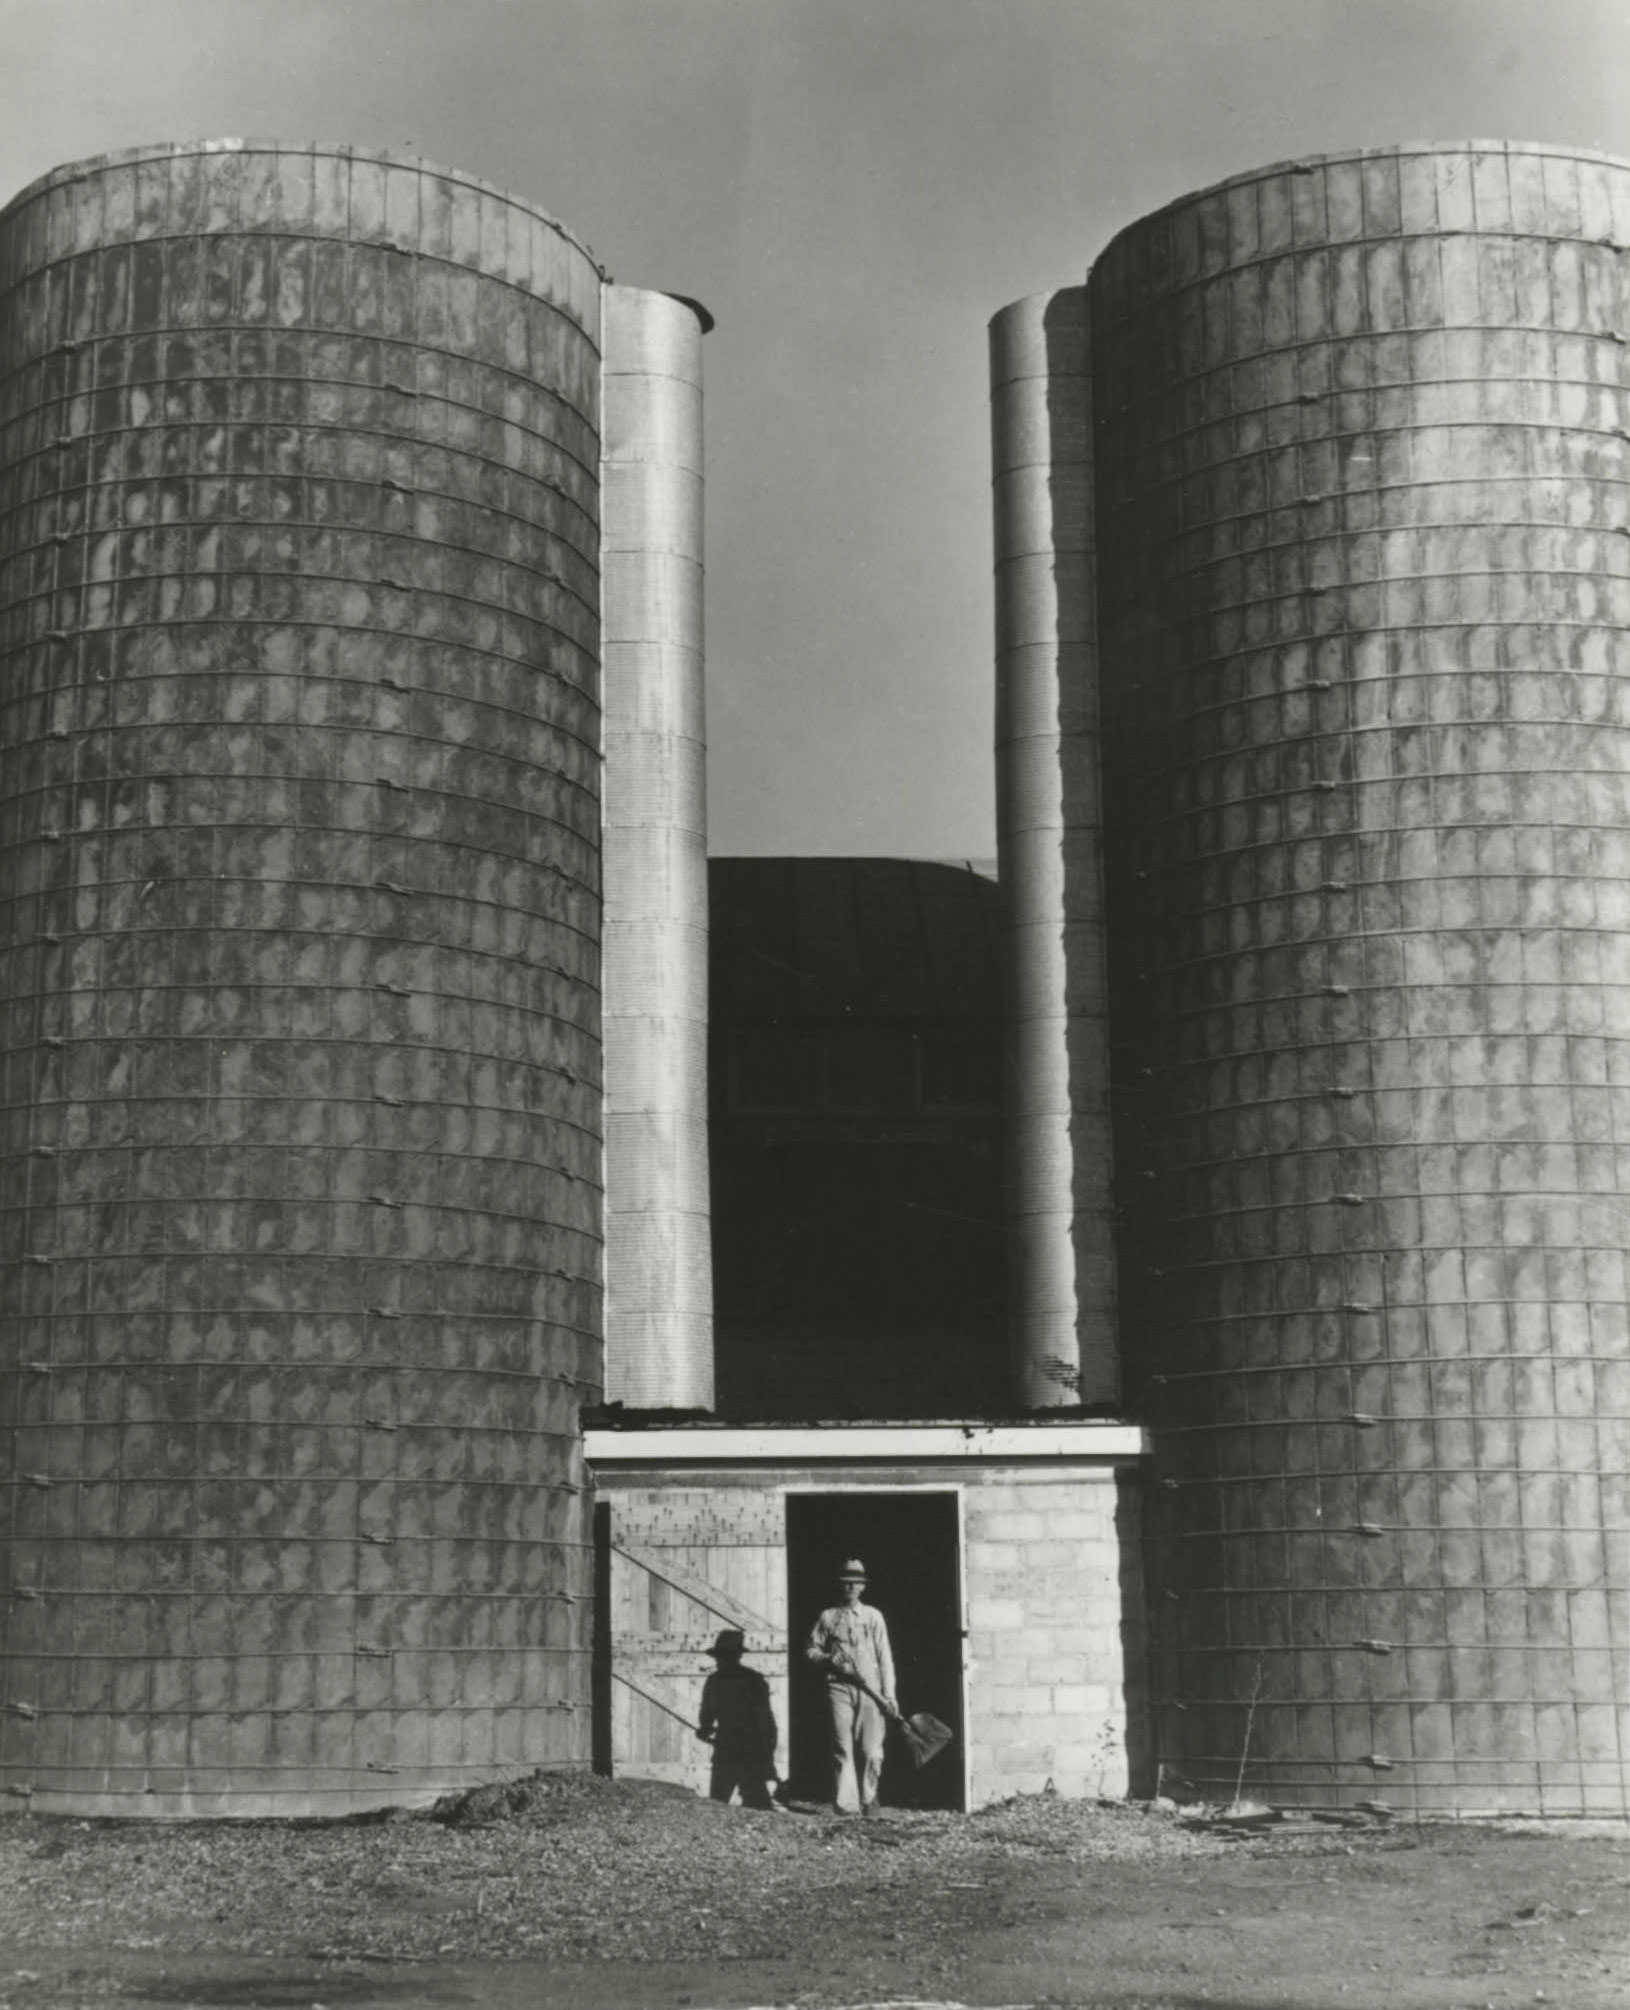 Silos at the Bois d'Arc cooperative farm store feed for 102 dairy cows, Osage Farms, Missouri